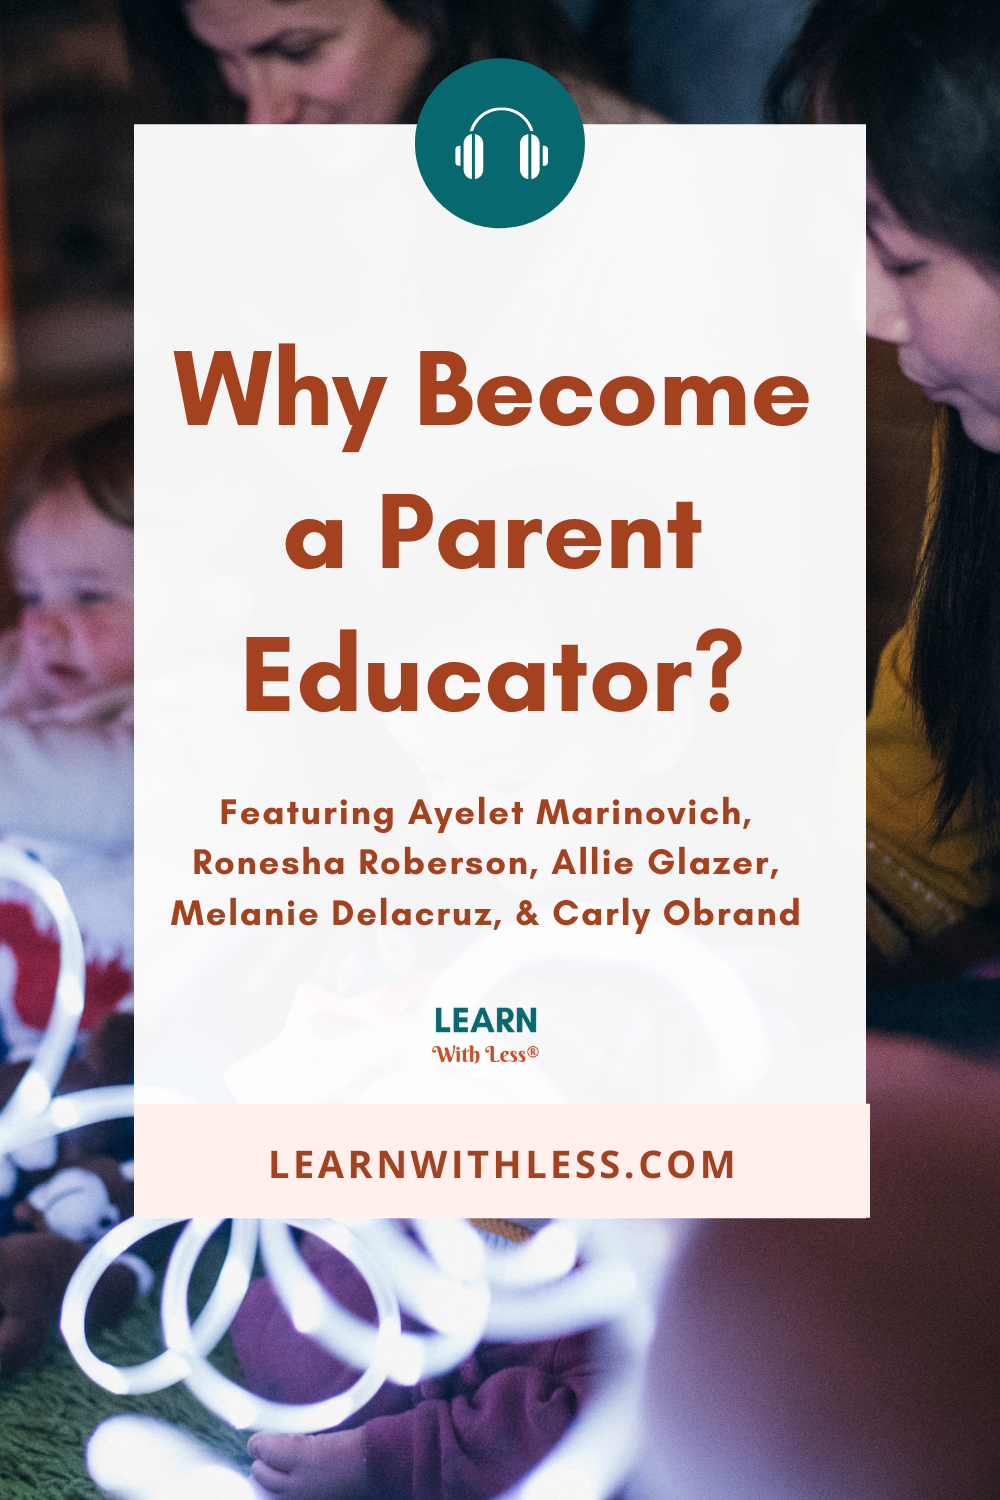 Why Become A Parent Educator? Ask These Learn With Less® Facilitators